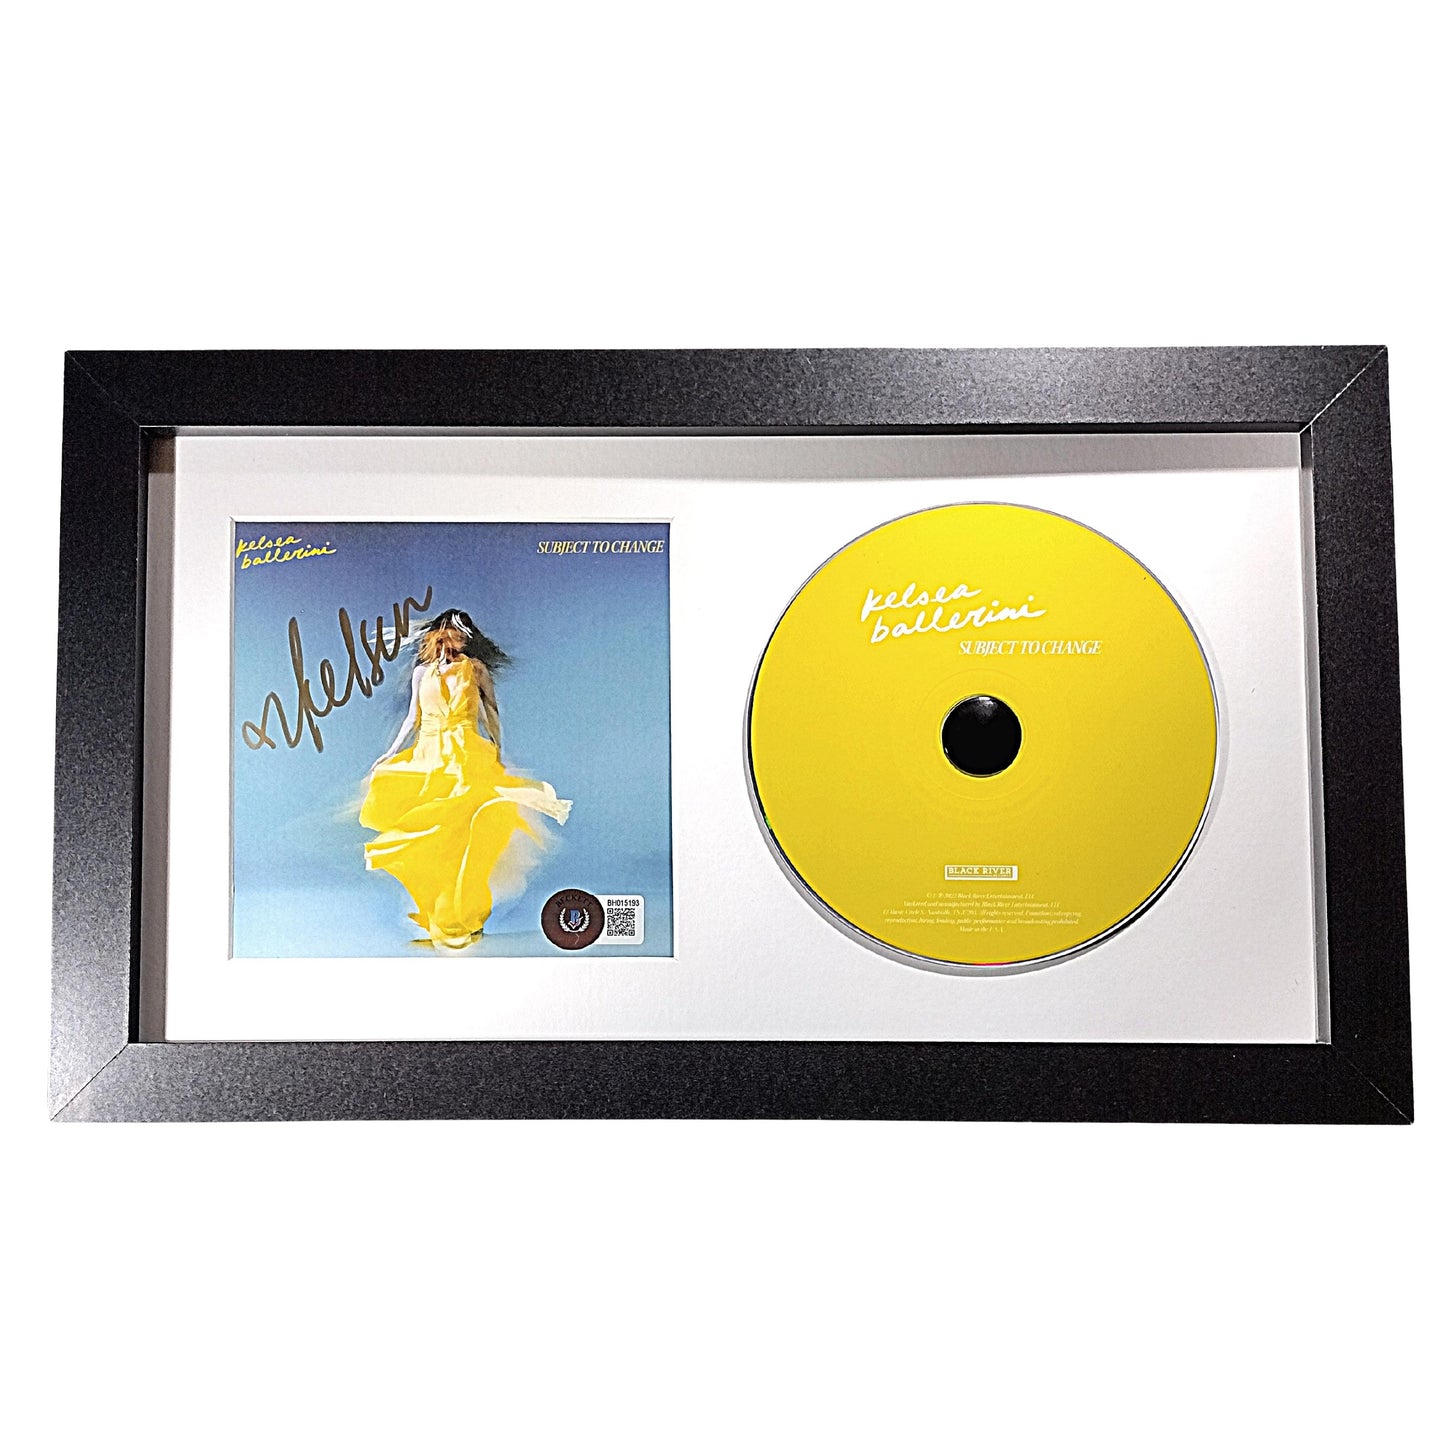 Music- Autographed- Kelsea Ballerini Signed Subject To Change Compact Disc Cover Framed Matted CD Wall Display Beckett Certified 201